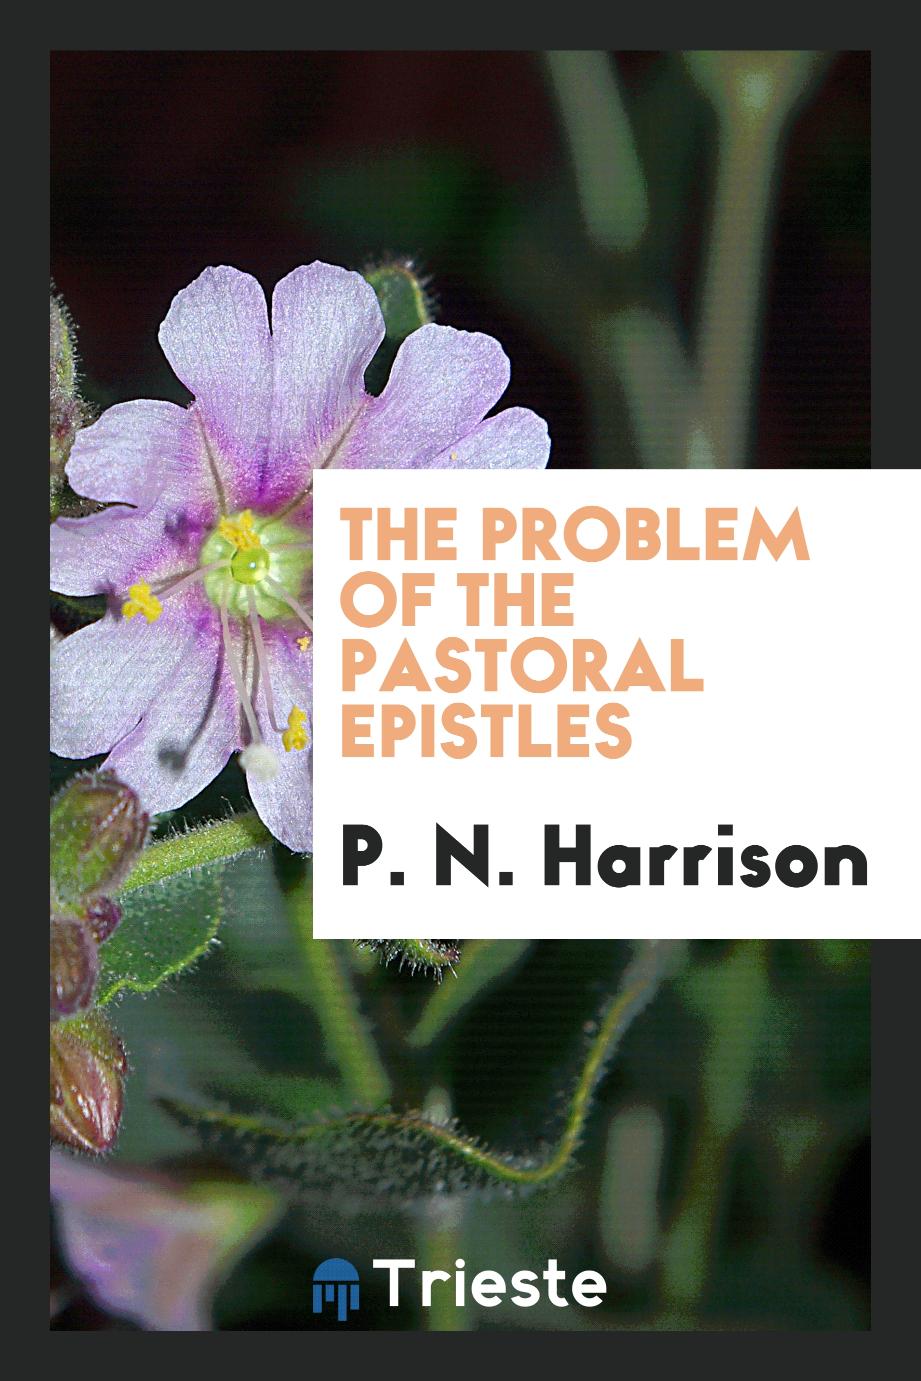 The problem of the Pastoral Epistles